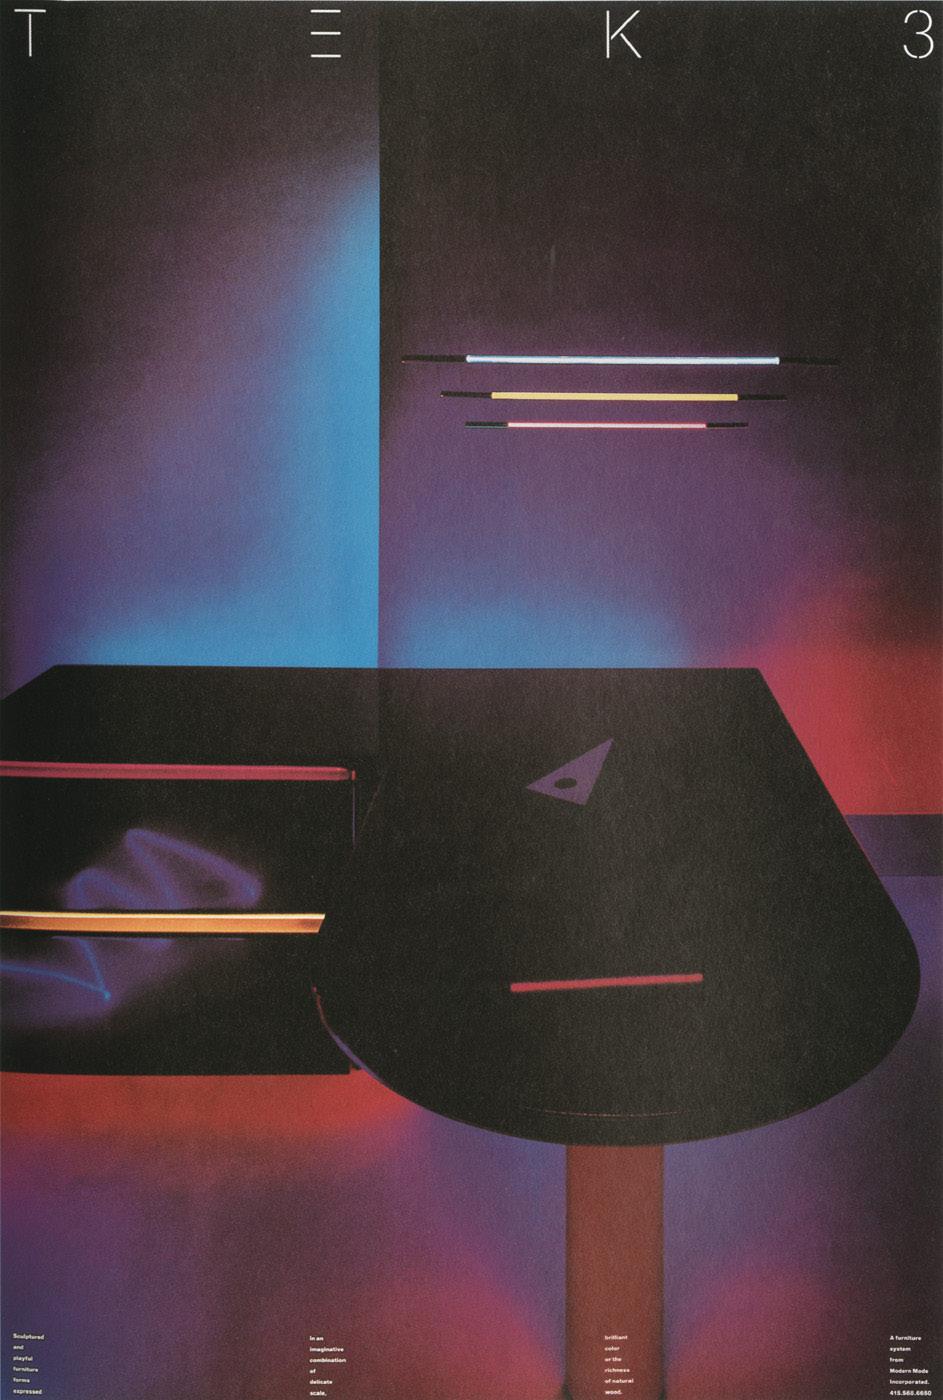 Michael Vanderbyl TEK3 Vanderbyl Design, 1988 Poster for technotronic music project Michael Vanderbyl was an influential member of a group of new wave designers located in